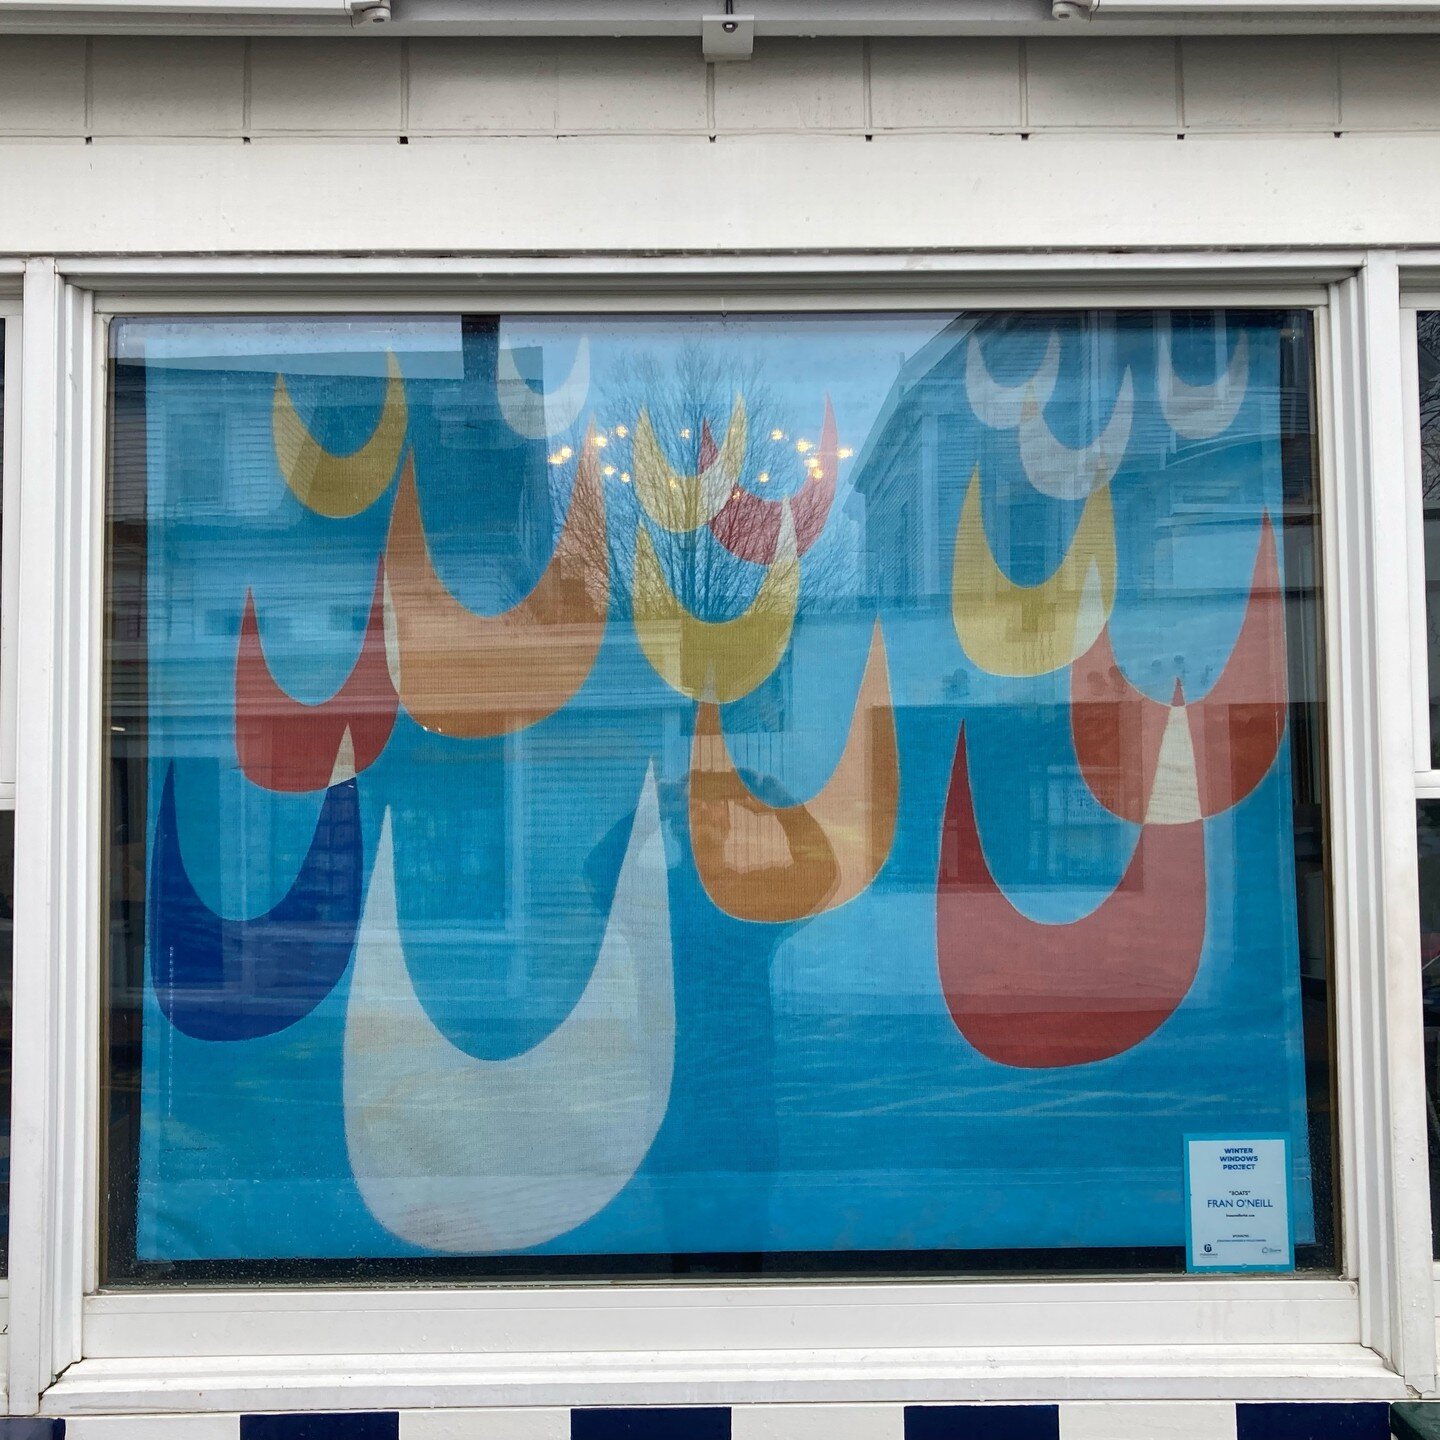 A Big Thank You to @guerrettemarc + his WINTER WINDOWS PROJECT featuring LOCAL ART! Also a big Thank You to THE CROWN + ANCHOR'S JONATHAN HAWKINS + PAOLO MARTINI for sponsoring my artwork! #myptown #myptown🌈 #commonsptown @commonsptown #abstractpain